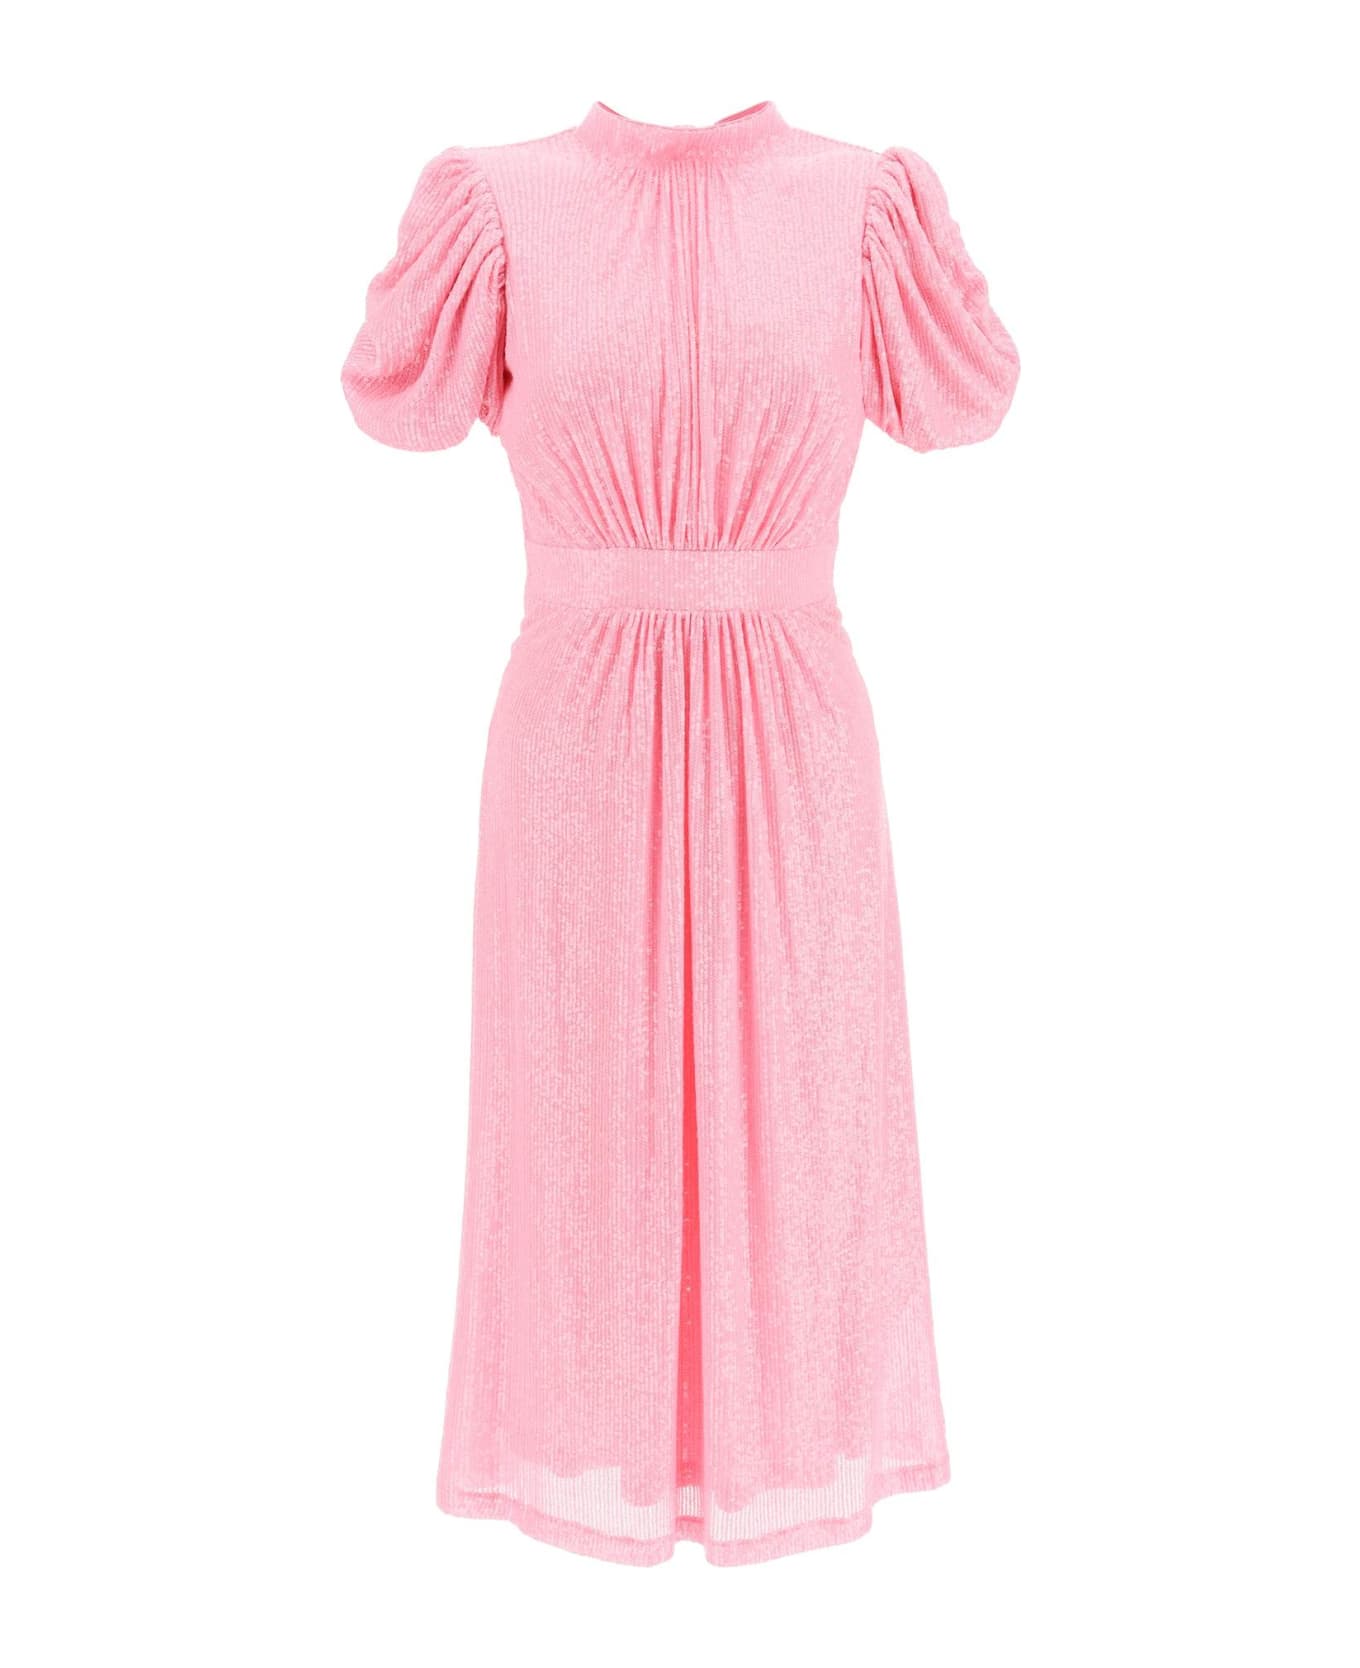 Rotate by Birger Christensen 'noon' Puff Sleeve Sequined Dress - BEGONIA PINK (Pink) ワンピース＆ドレス